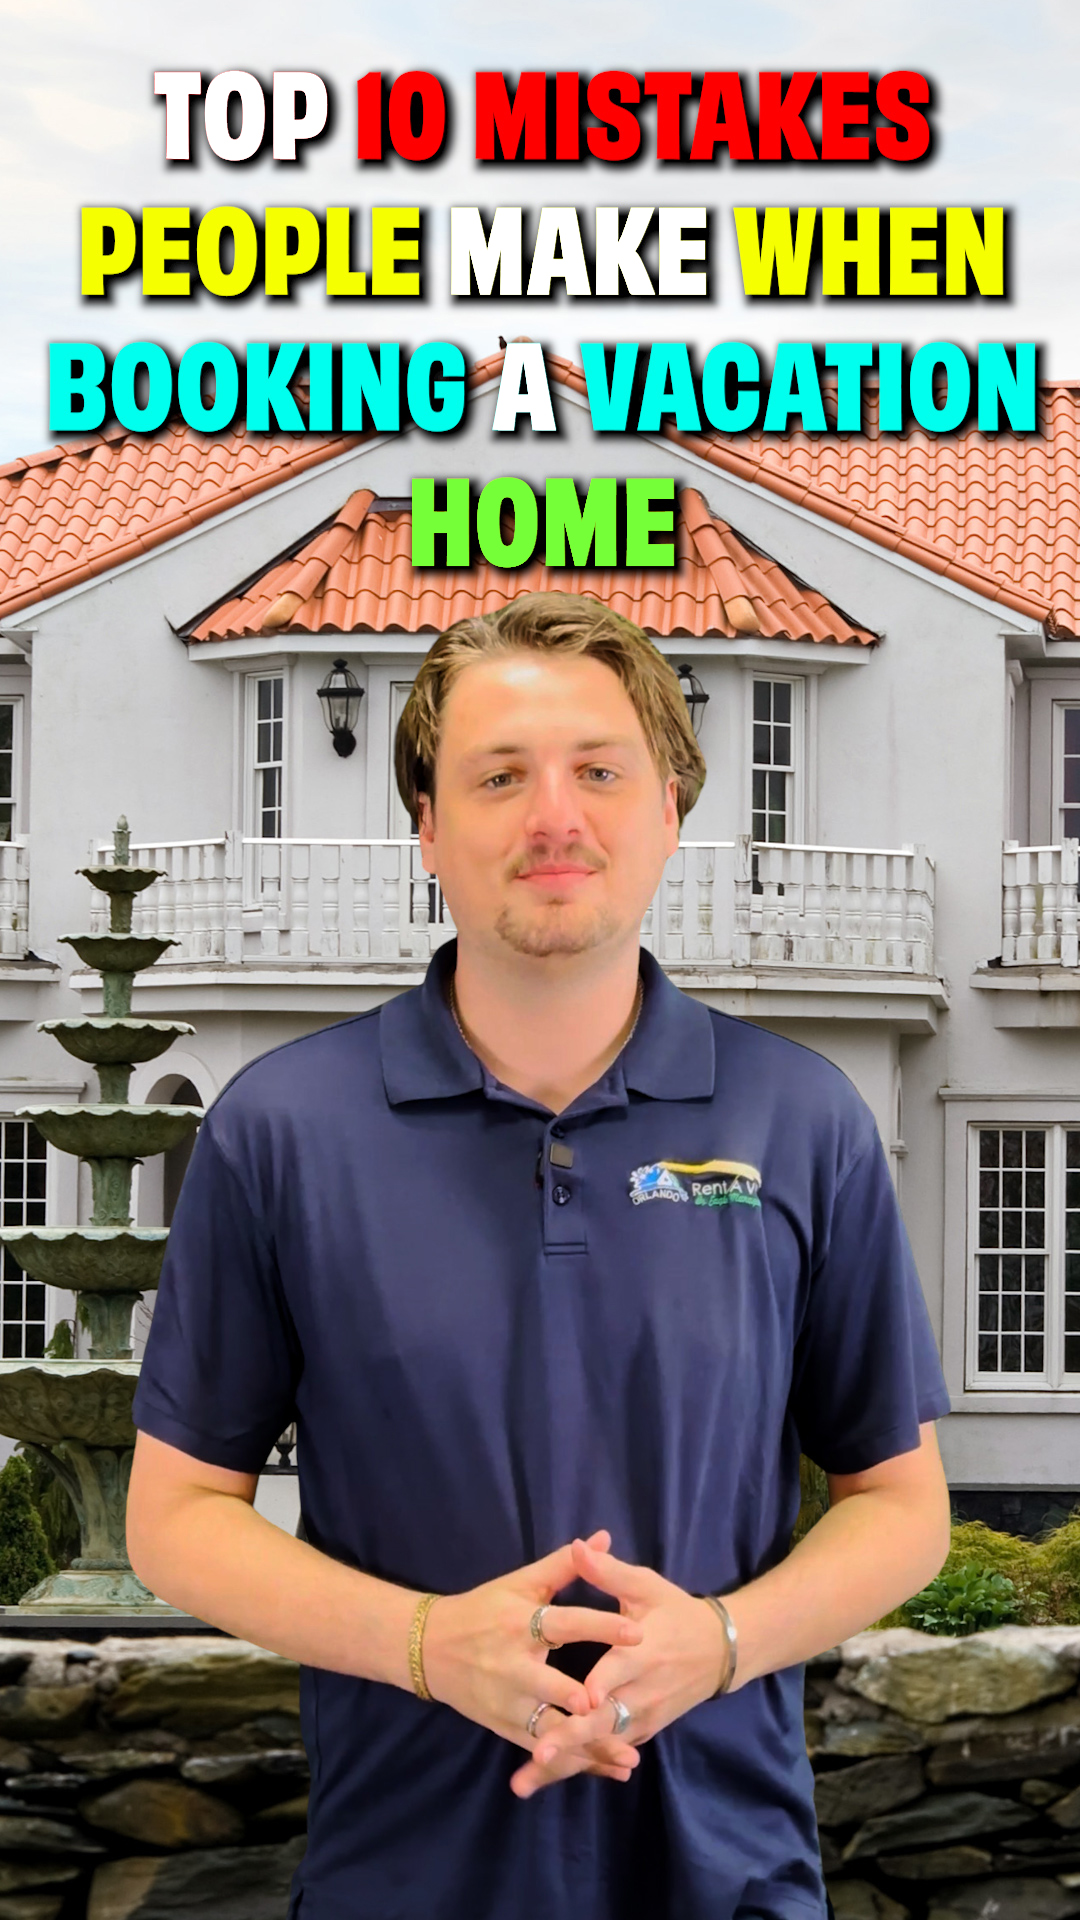 Orlando Rent A Villas video: Top 10 mistakes people make when booking a vacation home